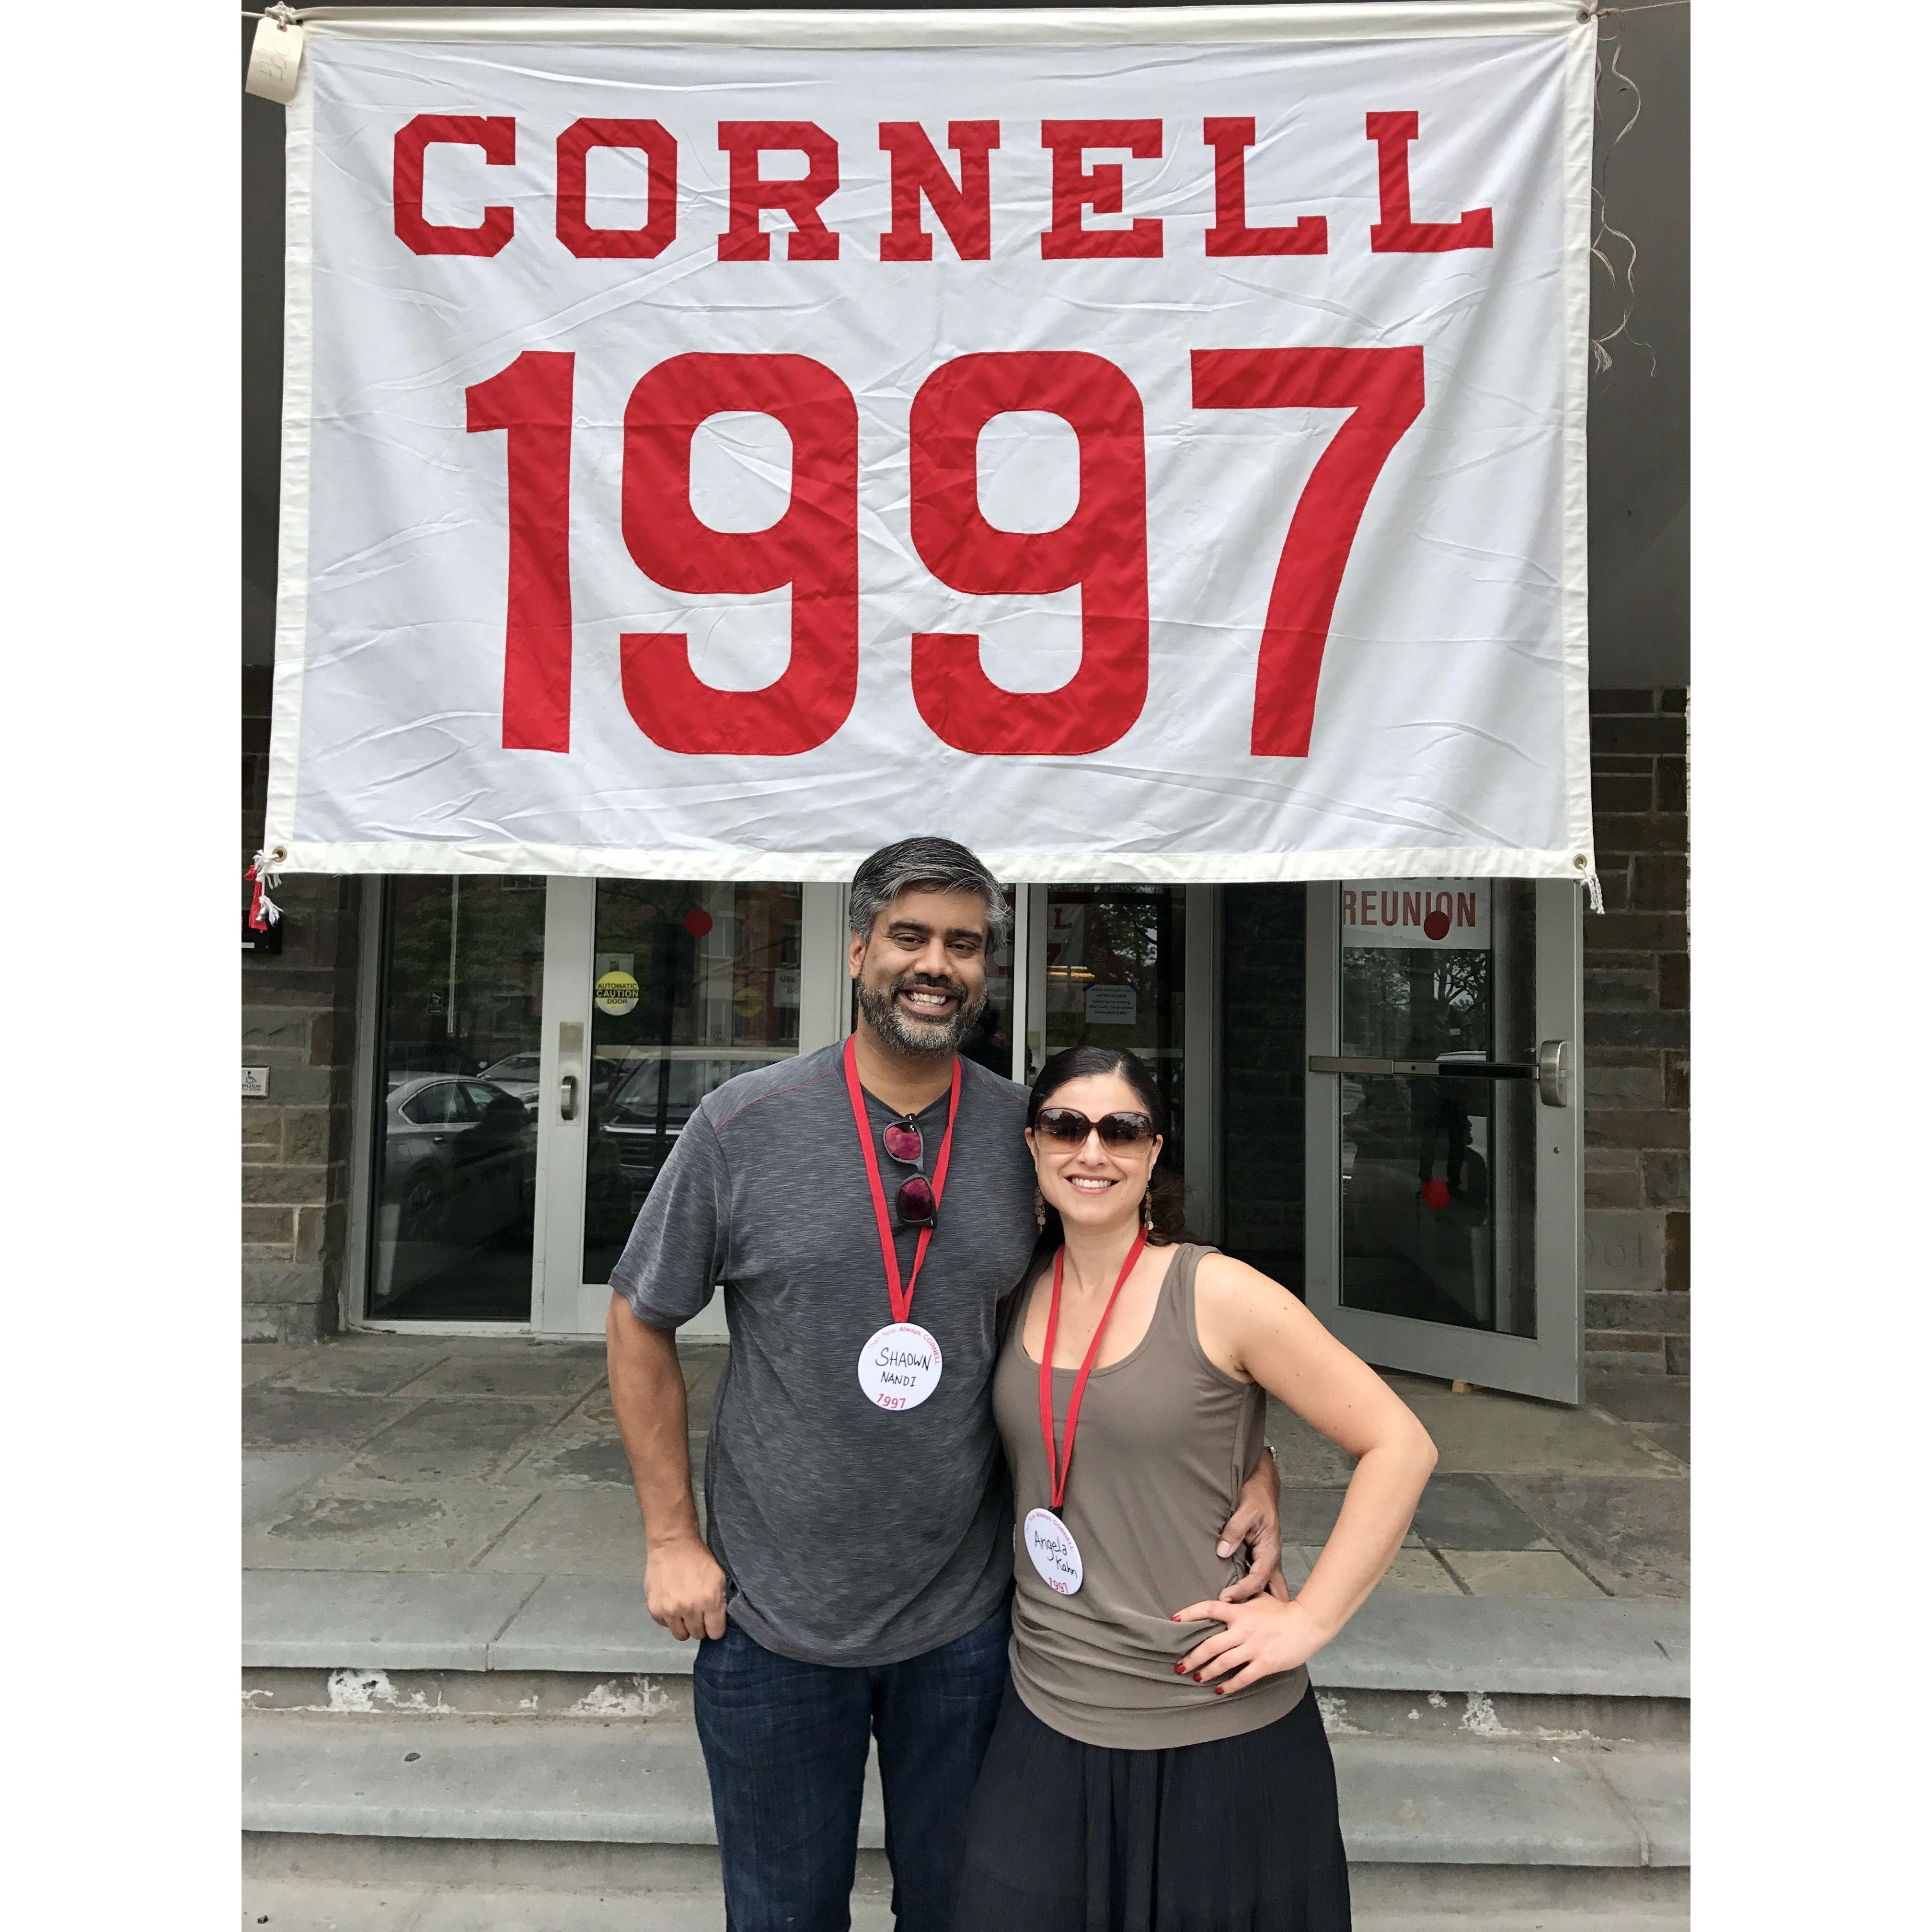 20-Year Reunion at Cornell (Ithaca, NY) 2017